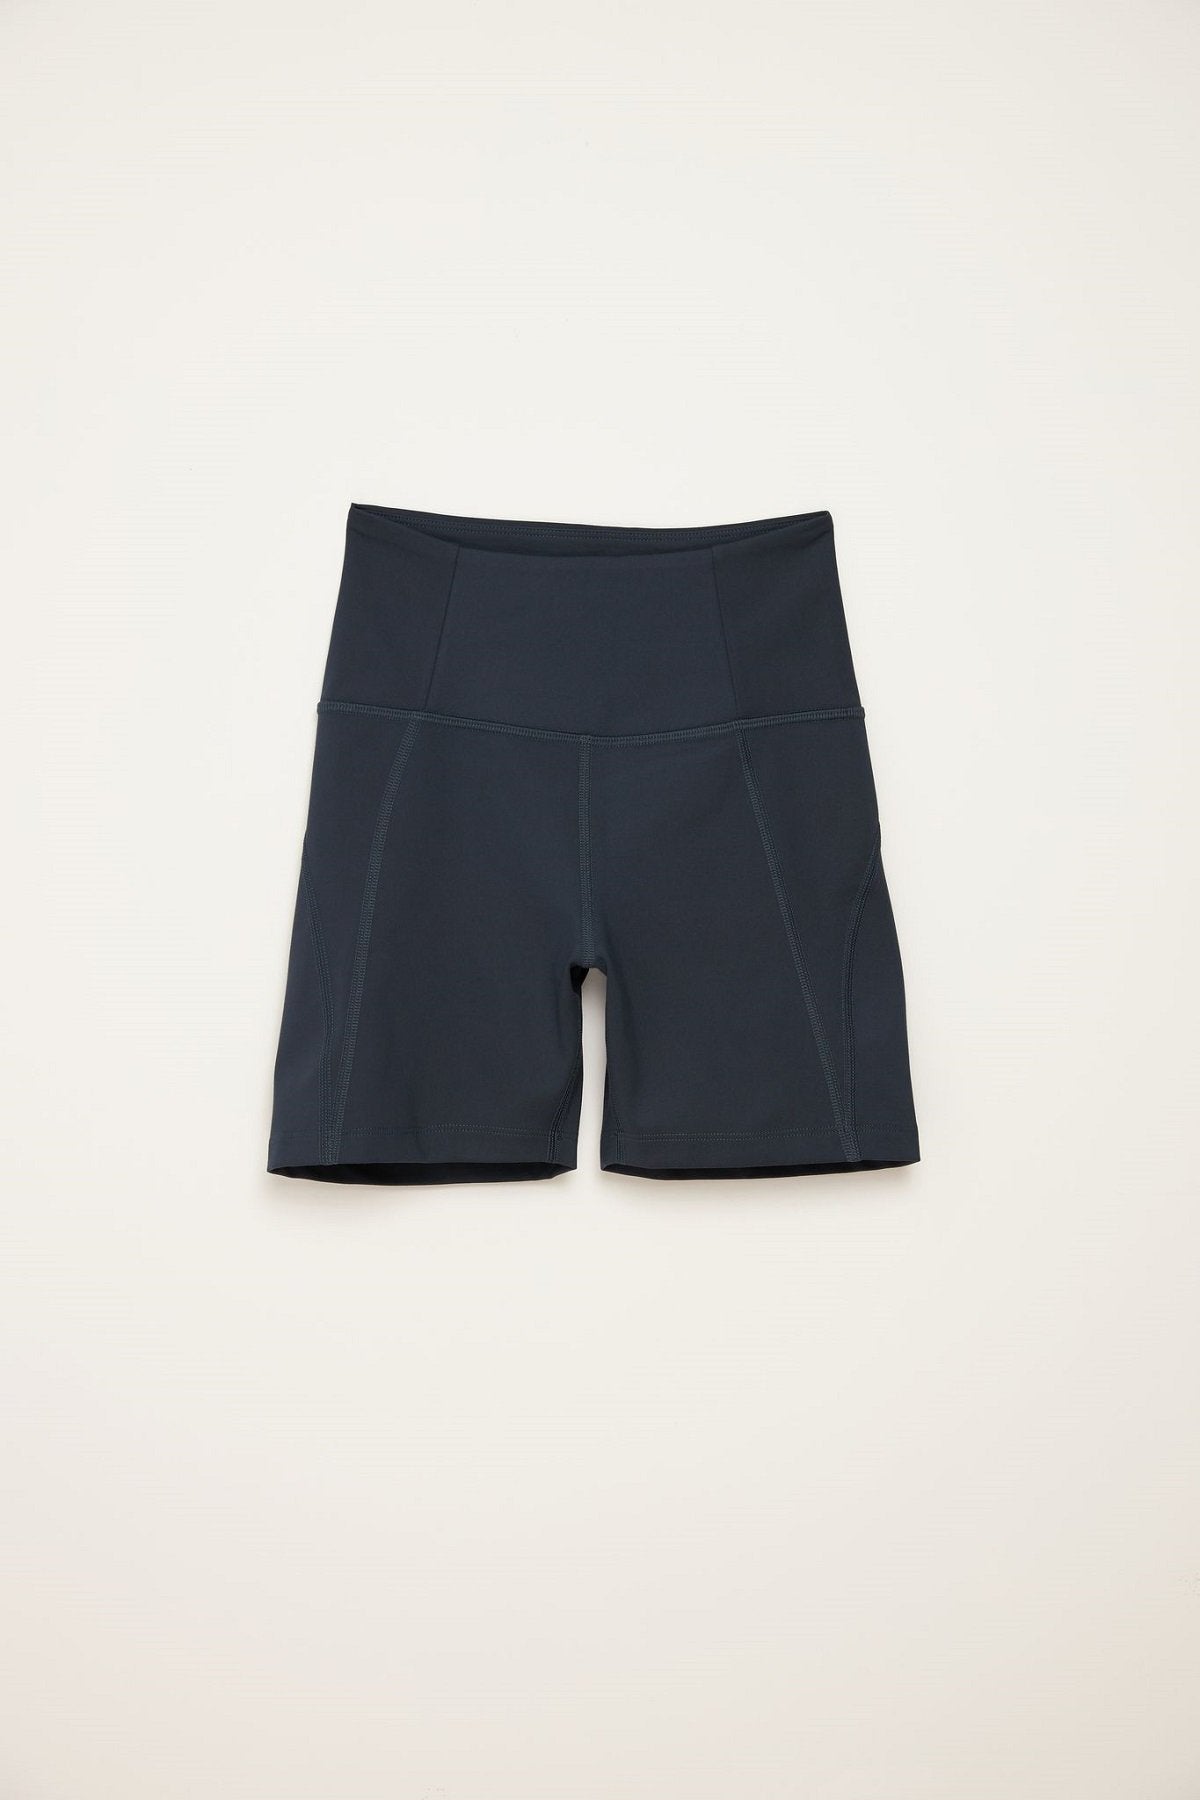 Girlfriend Collective Run Shorts High-Rise - Made from Recycled Plastic Bottles Midnight Pants